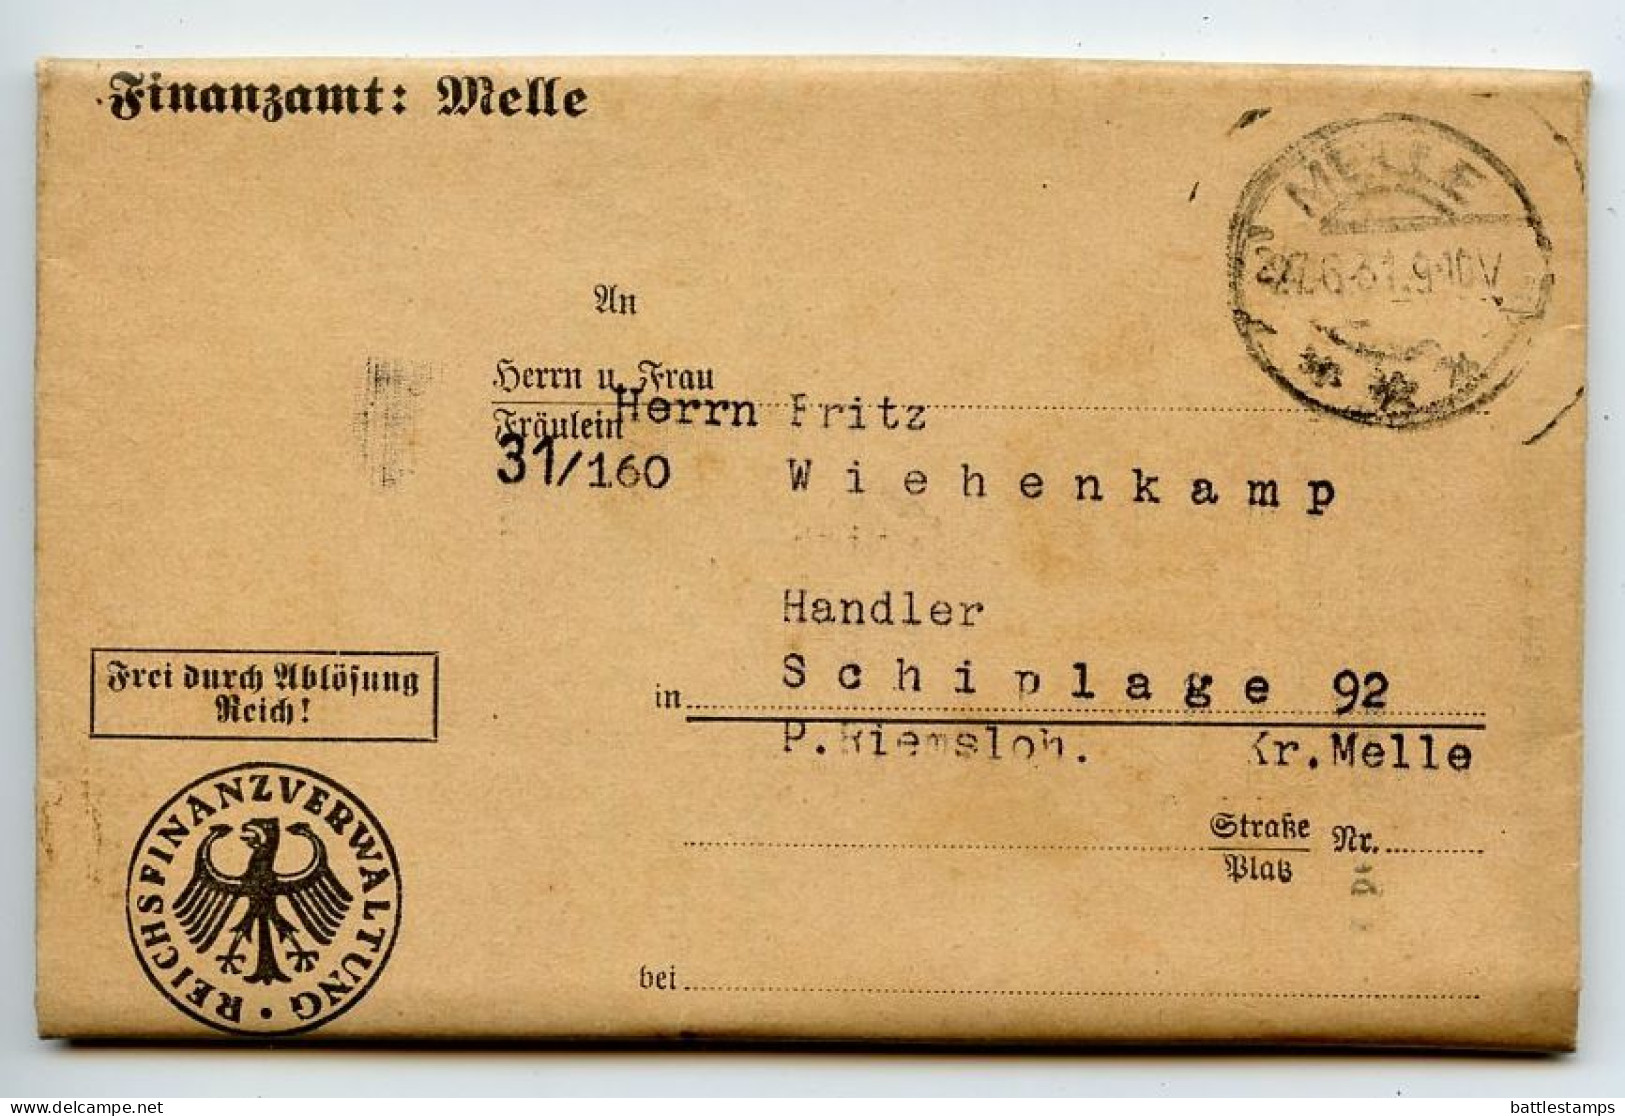 Germany 1931 Official Folded Document Cover; Melle - Finanzamt (Tax Office); Income & Sales Tax Notices - Covers & Documents